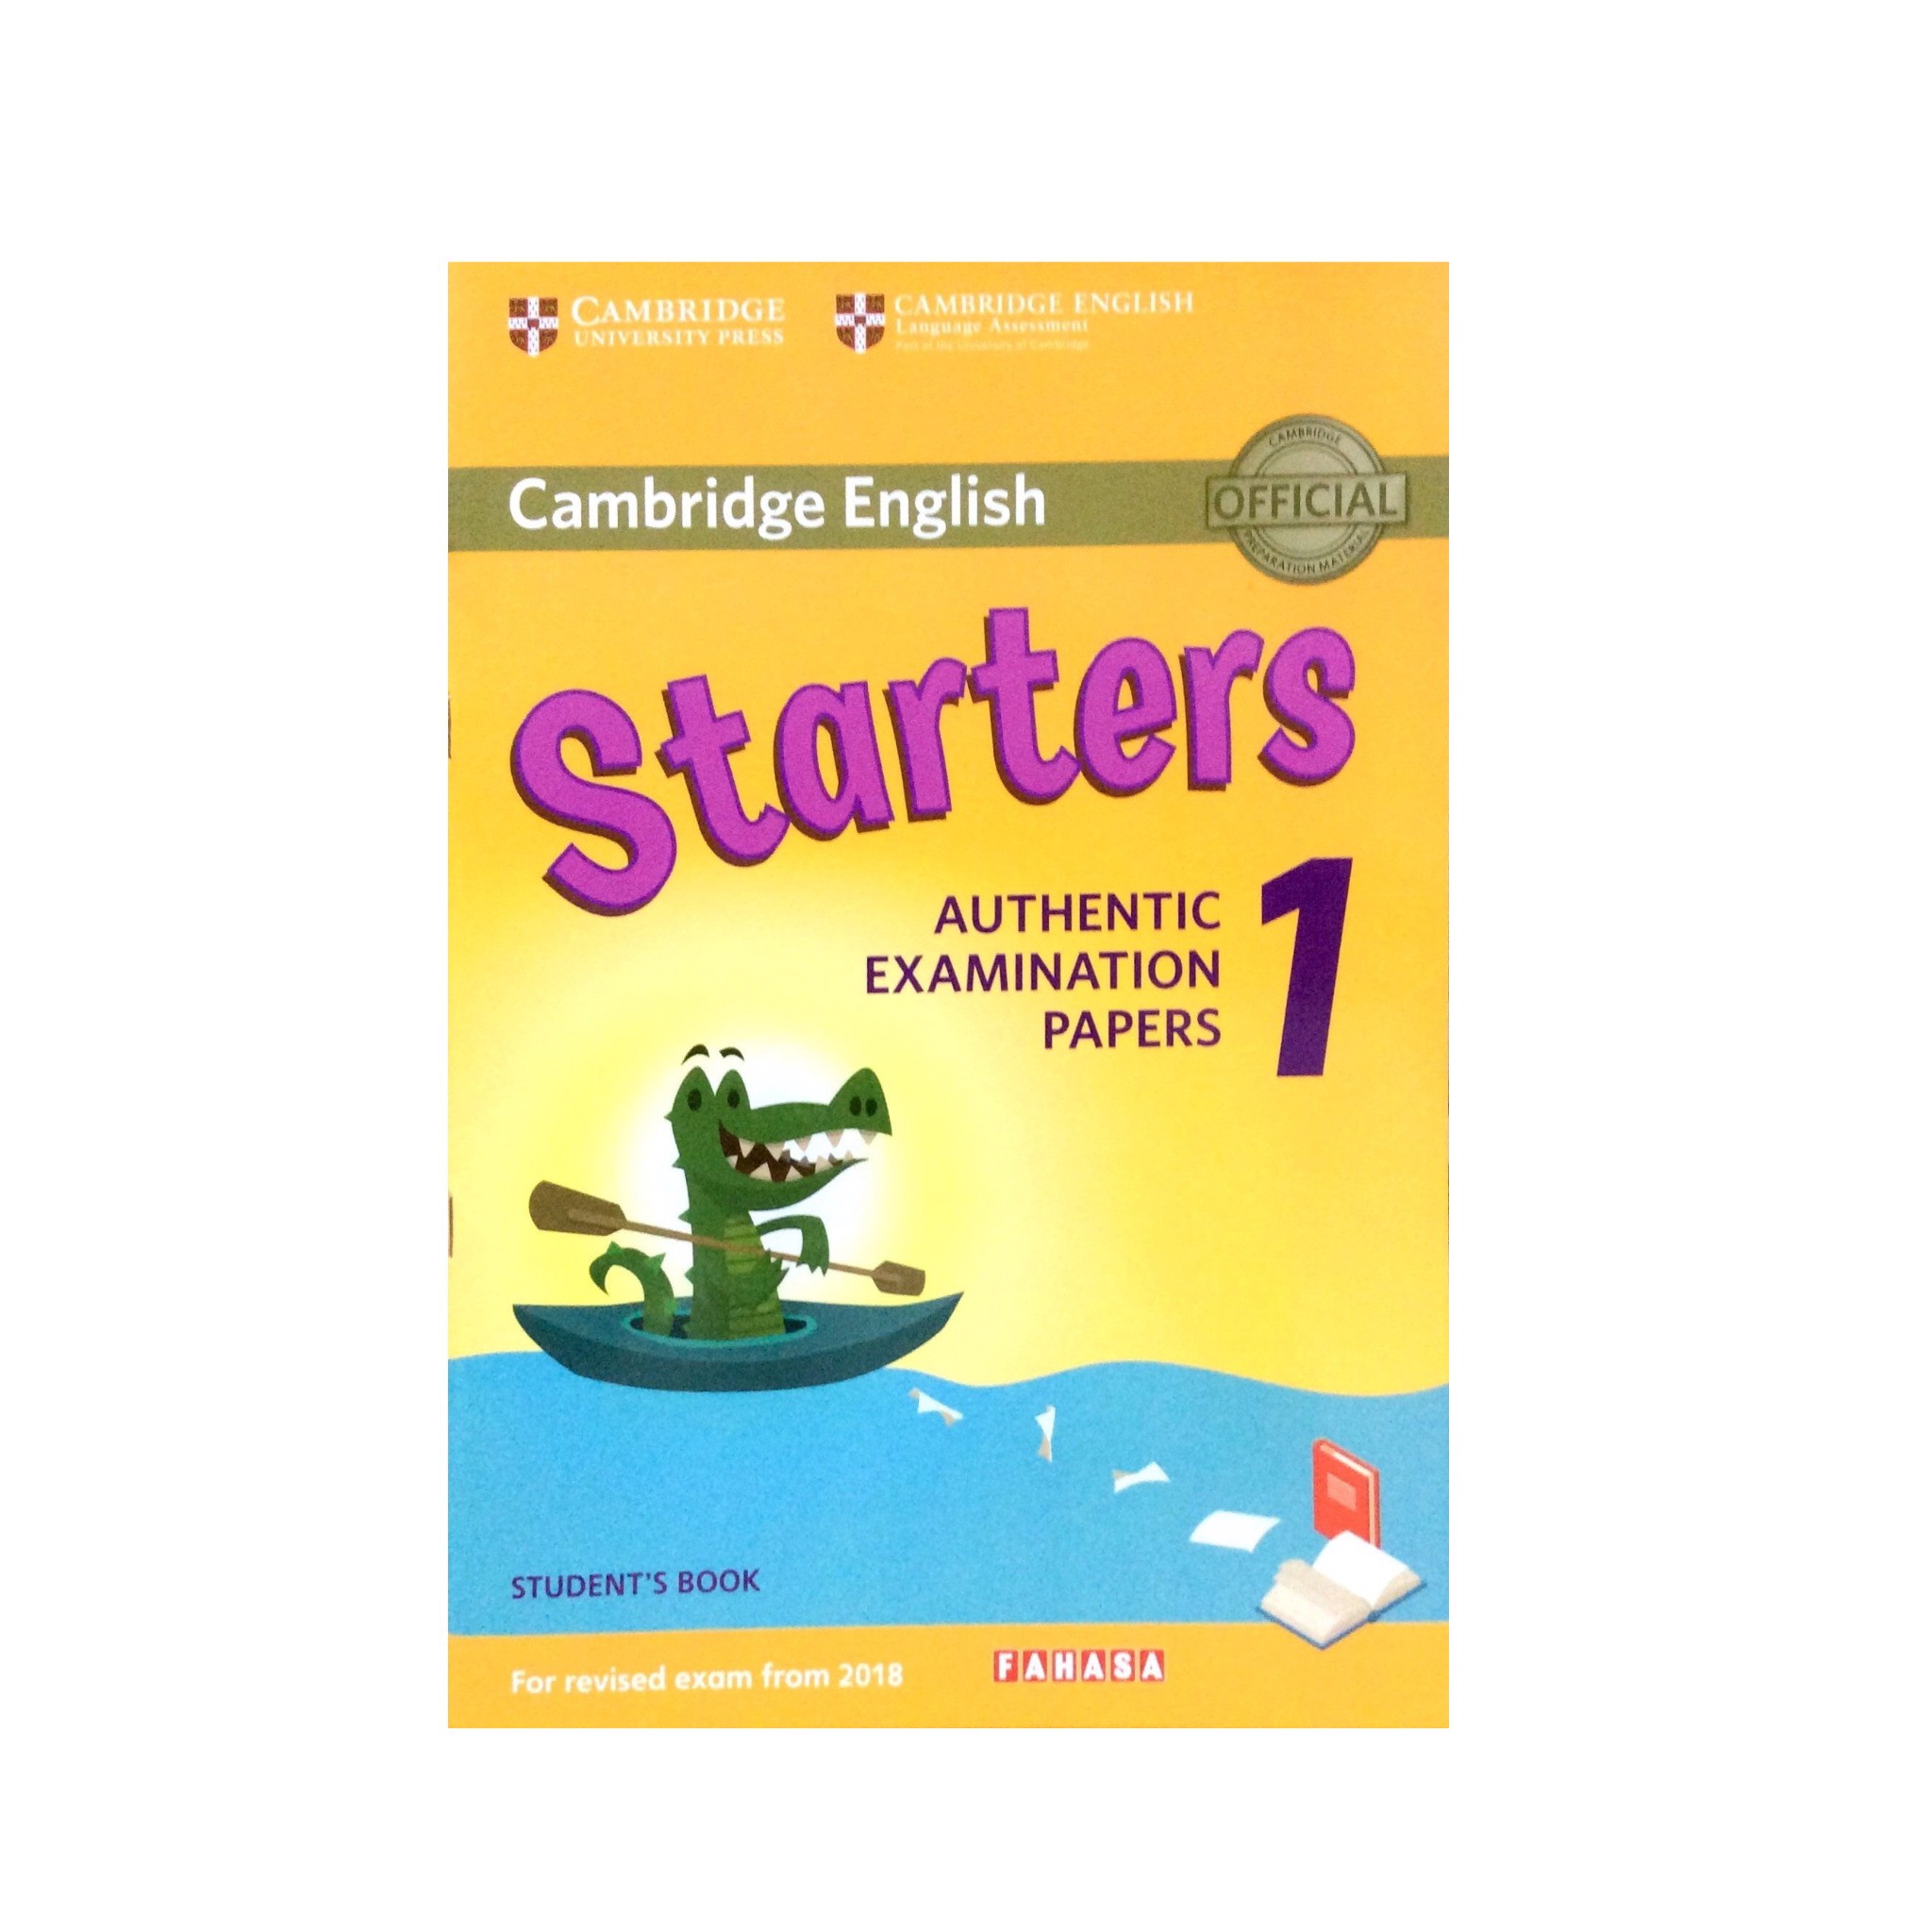 t-i-ebook-cambridge-english-starters-authentic-examination-papers-1